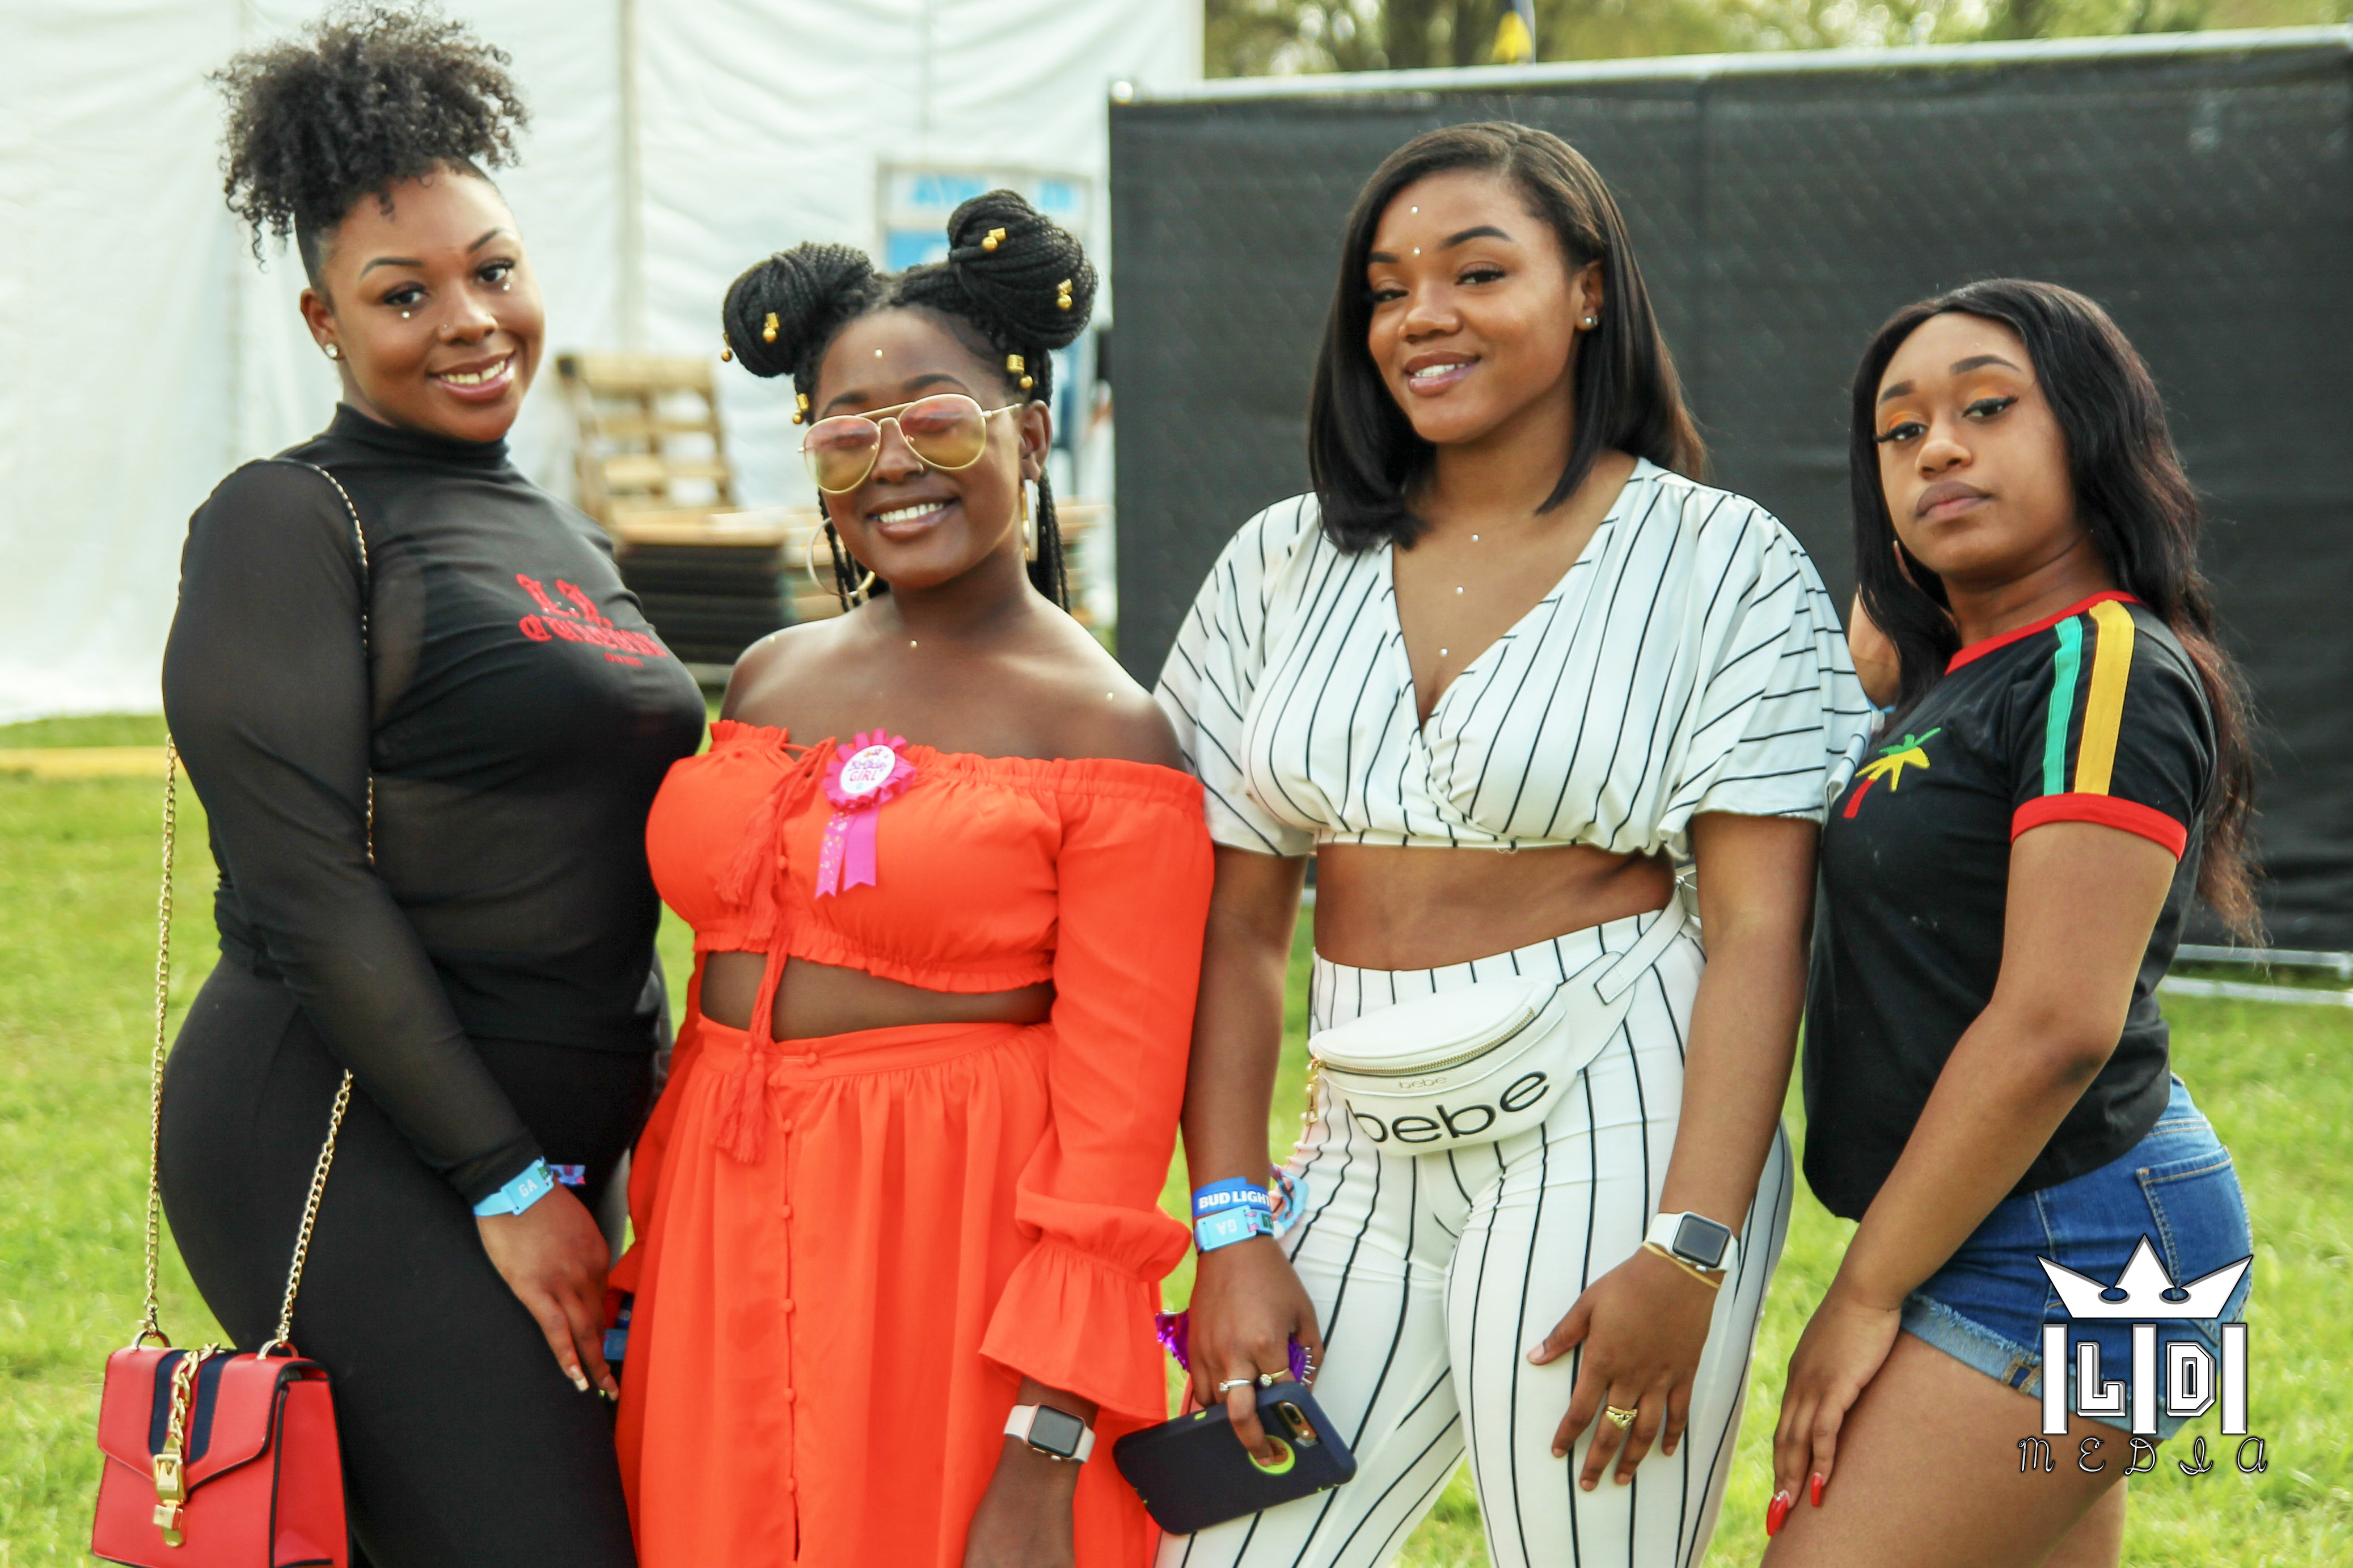 Gallery] Dreamville Festival Brought An Eclectic Mix Of Fashions